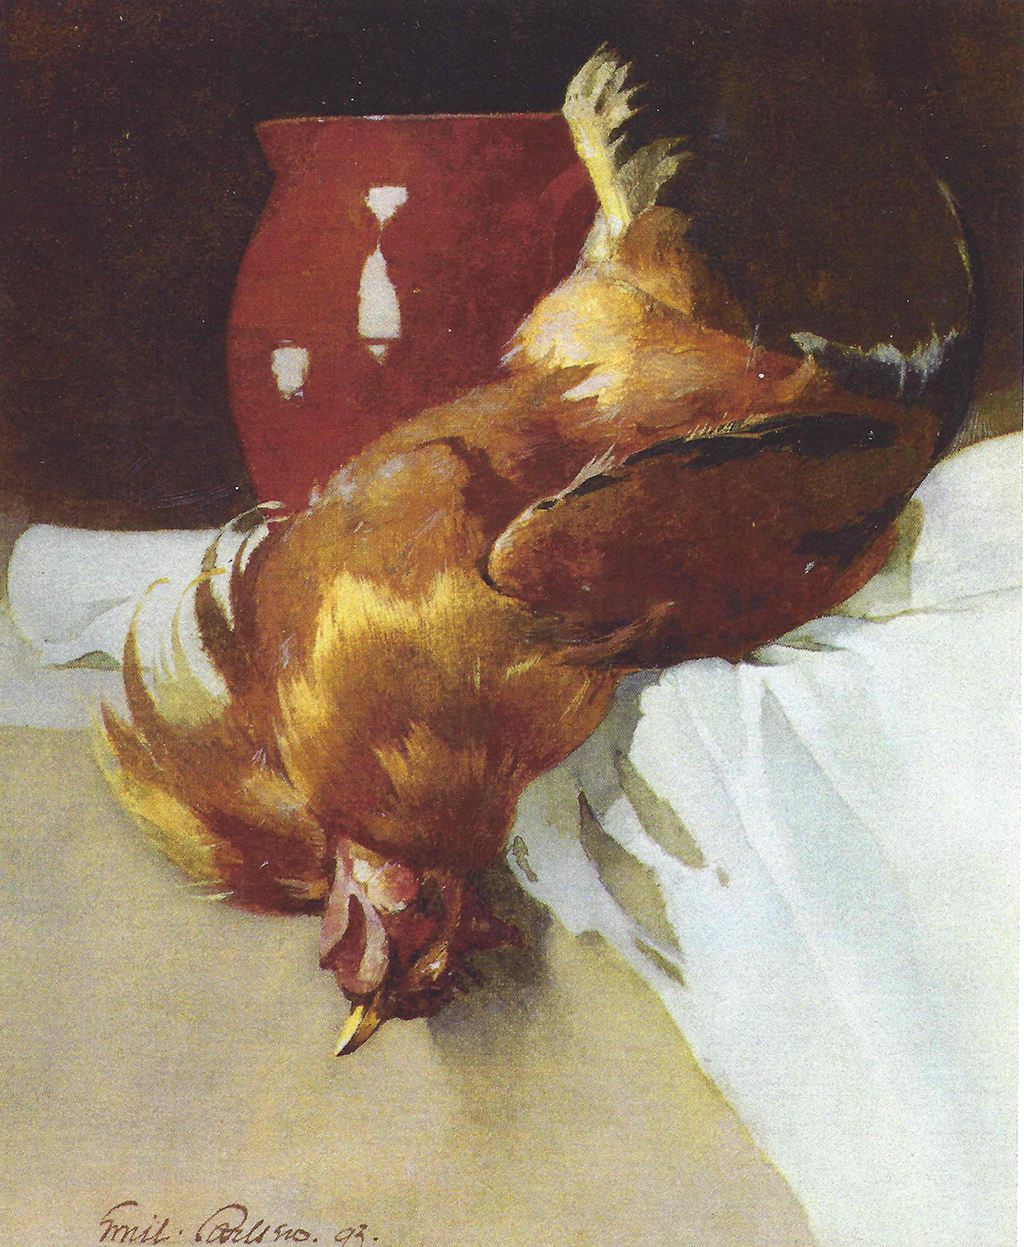 Red Jug and Chicken (also called Still life (52)), 1893